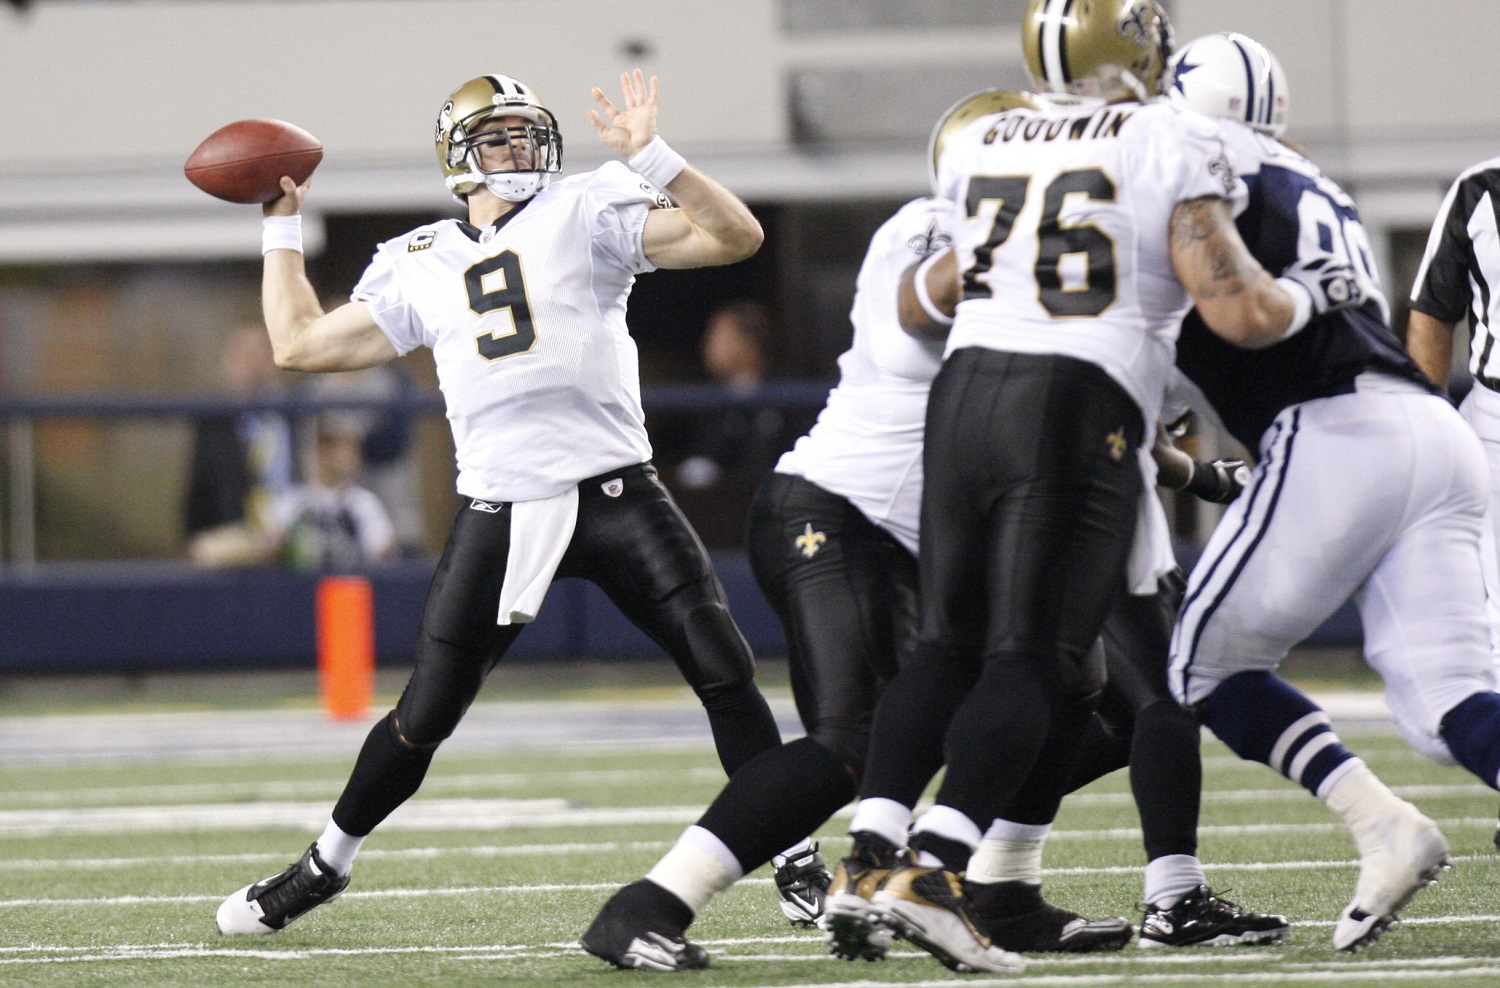 New Orleans Saints quarterback Drew Brees (9) passes during the first half of the NFL football game in Arlington, Texas,  Thursday, Nov. 25, 2010.  (AP Photo/Mike Fuentes)